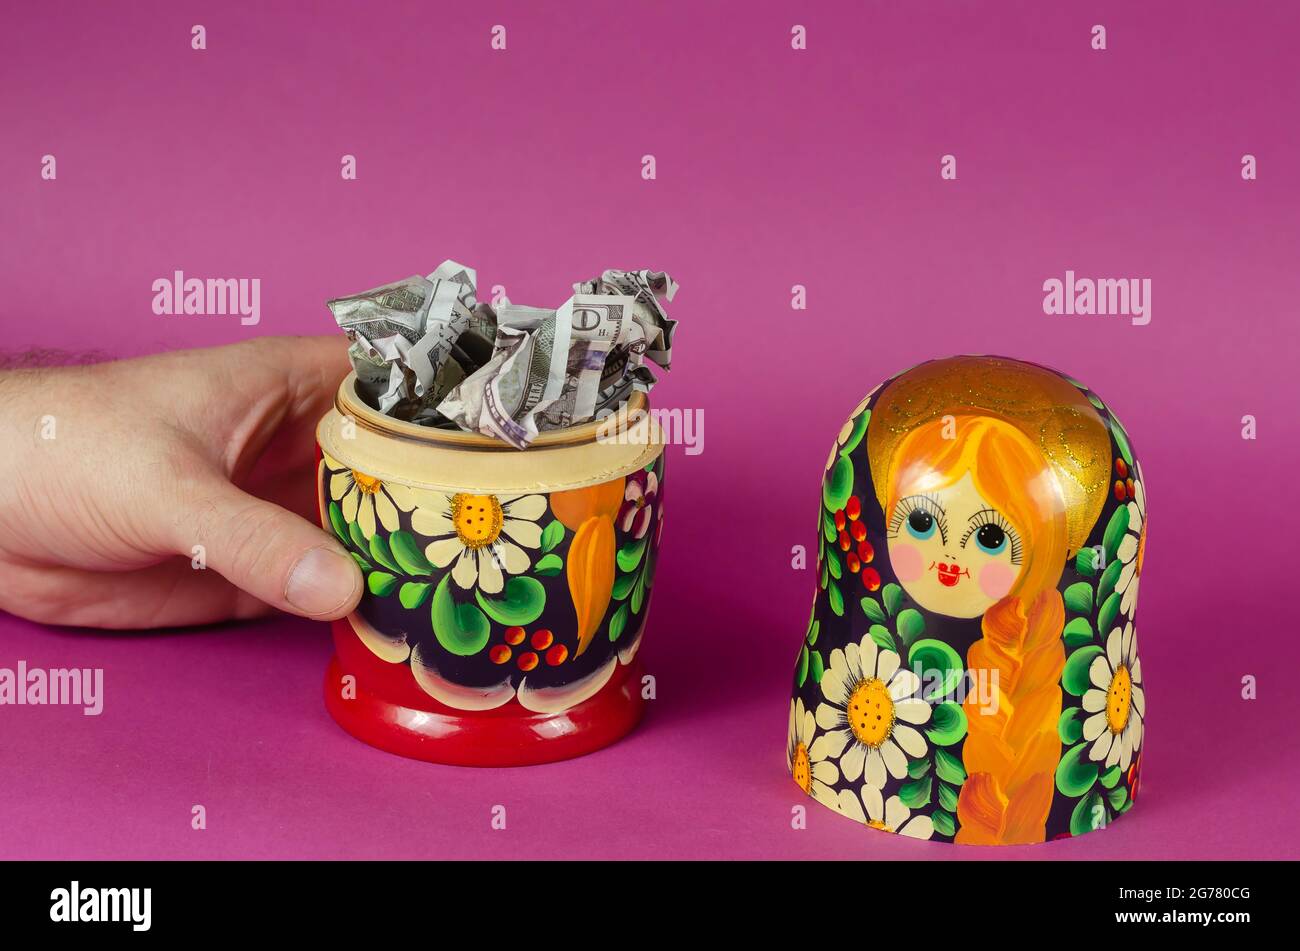 Hand holds Russian matryoshka full of money. Crumpled hundred dollar bills fall out of open wooden toy. Symbol of Russia and American money on pink ba Stock Photo